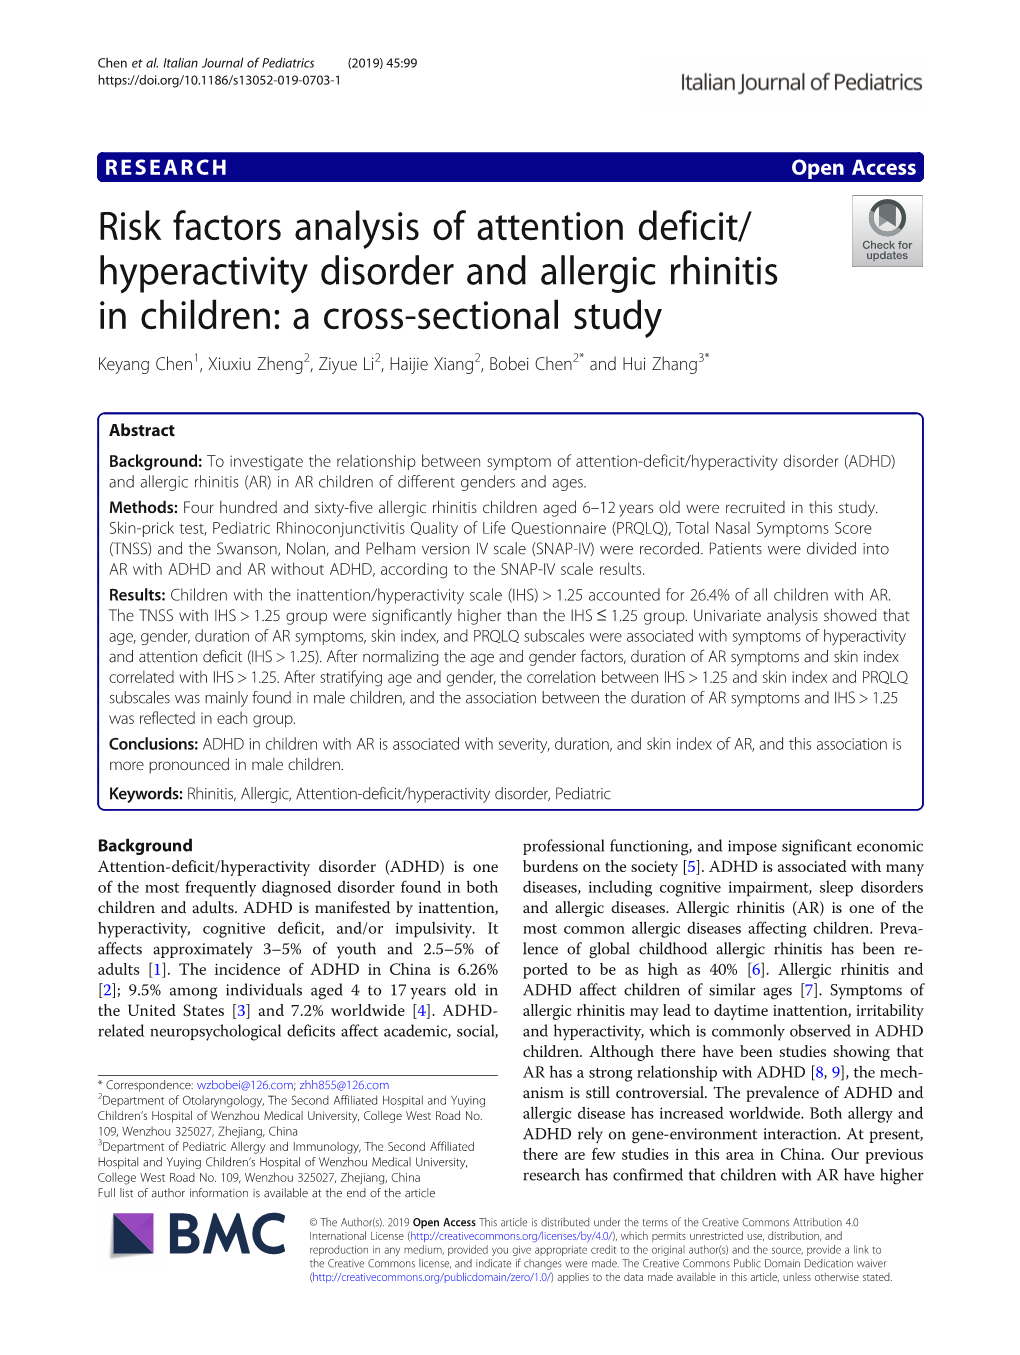 Risk Factors Analysis of Attention Deficit